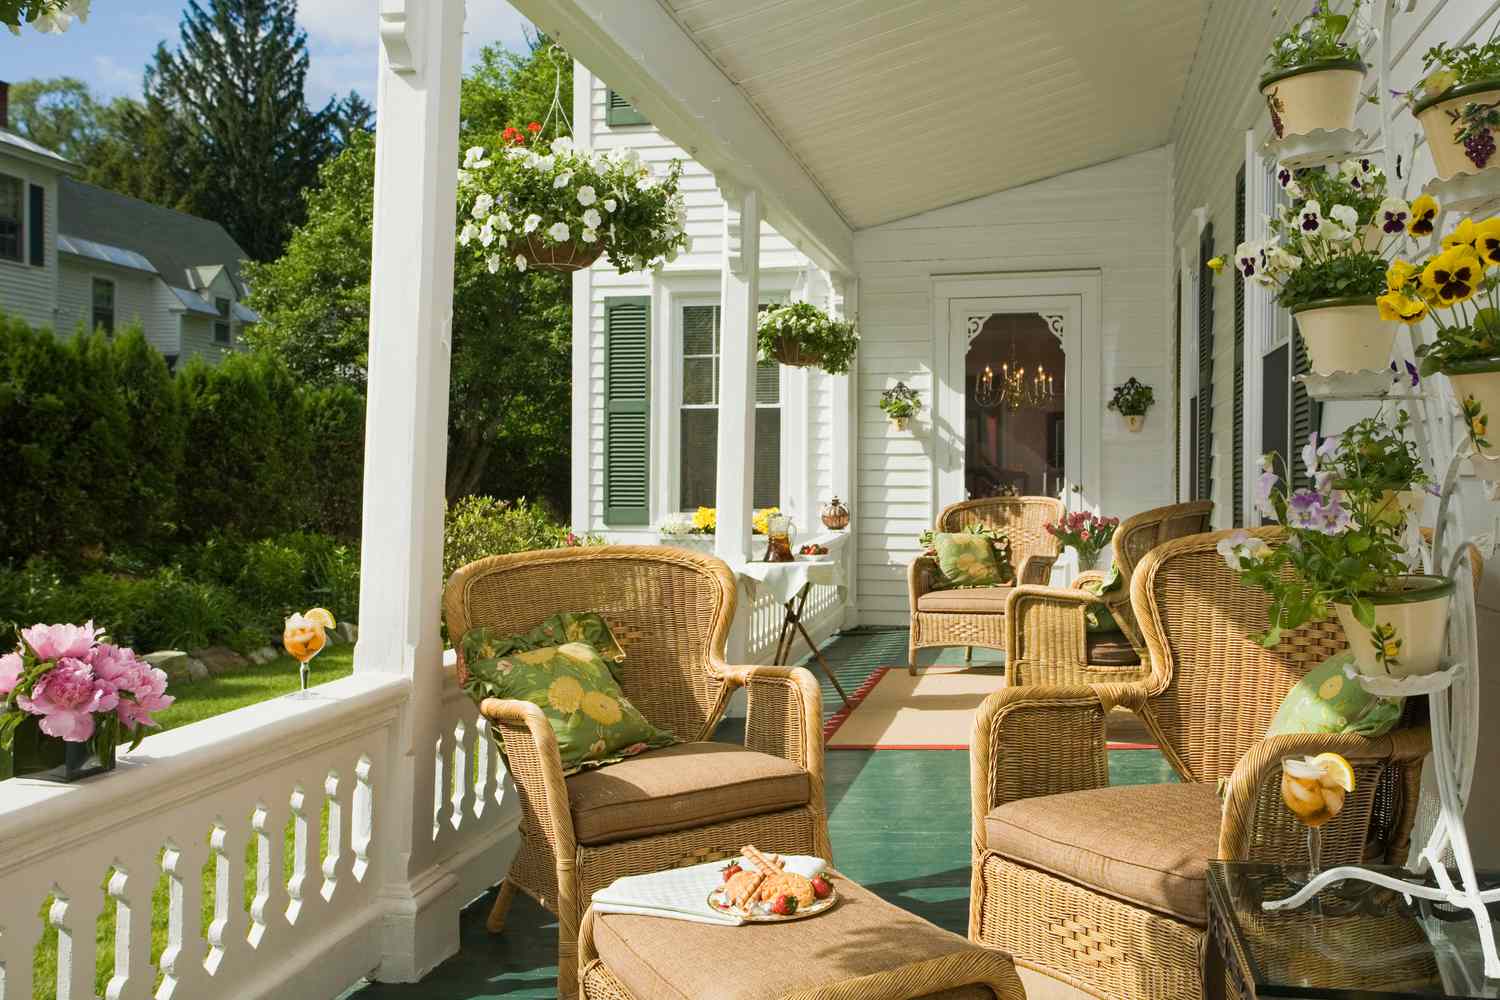 19 Must-See DIY Porch Ideas For Your Home